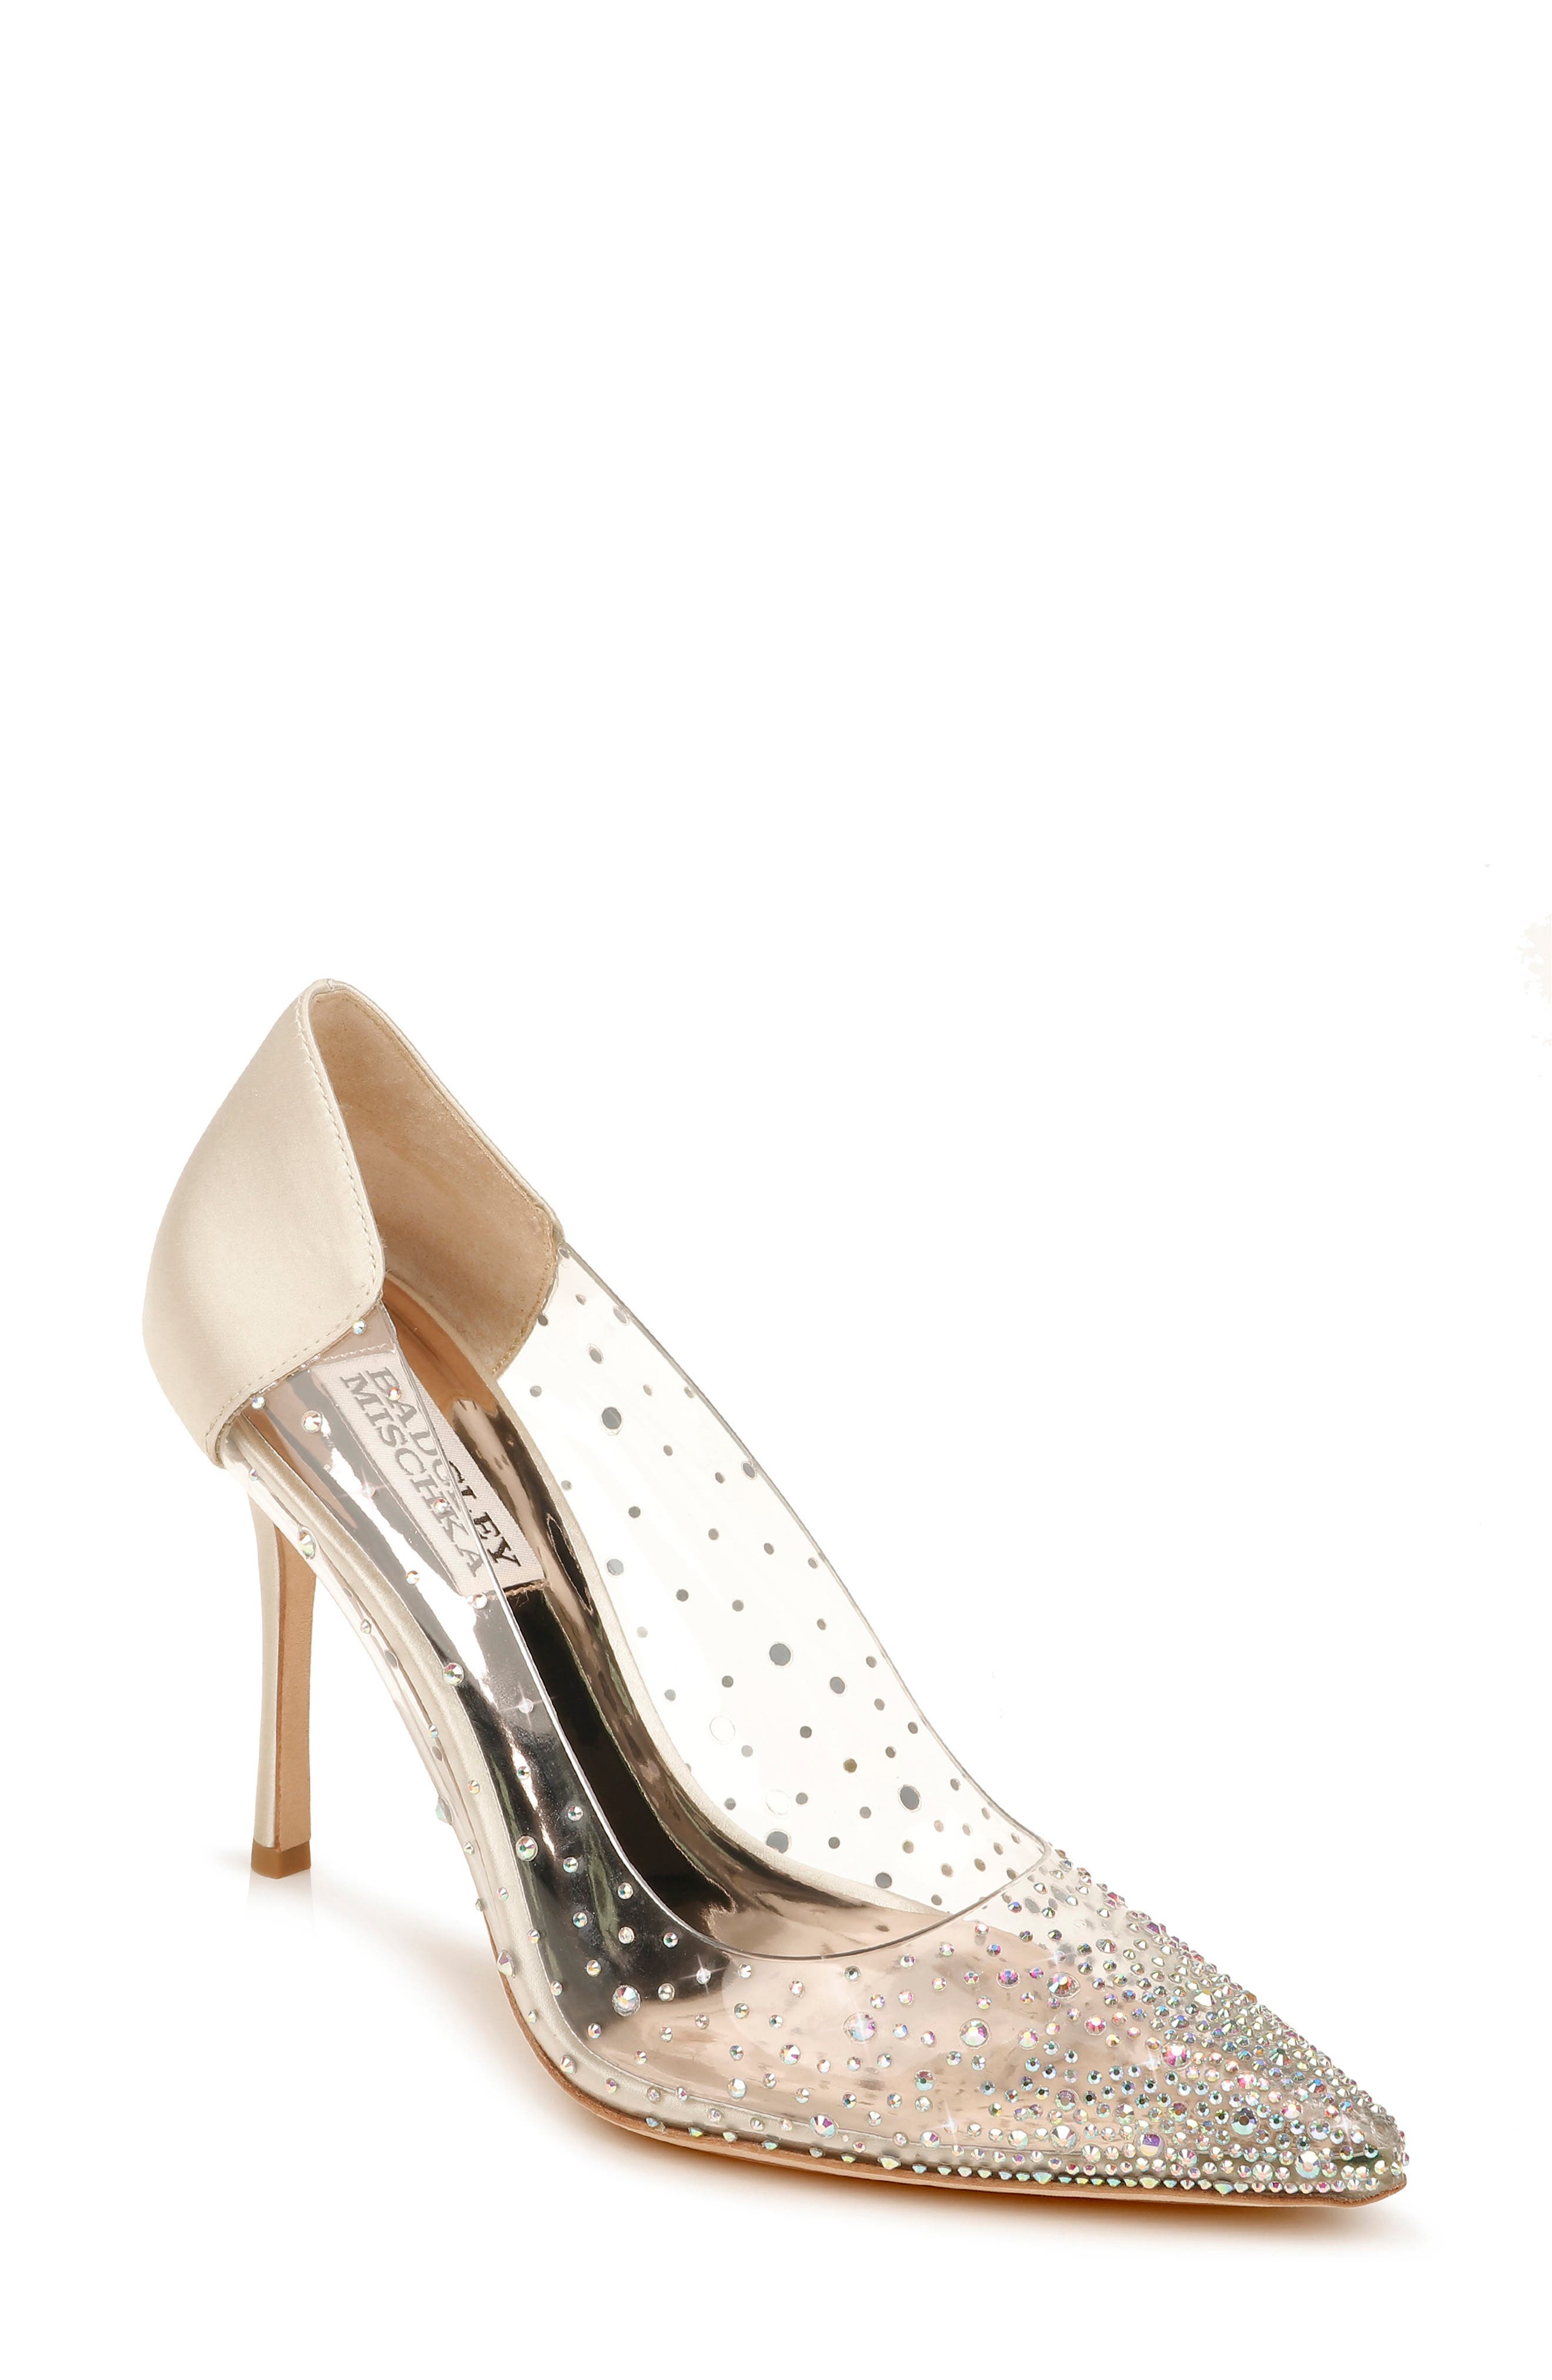 Badgley Mischka Collection Gisela Embellished Pointed Toe Pump In Ivory Nappa Leather